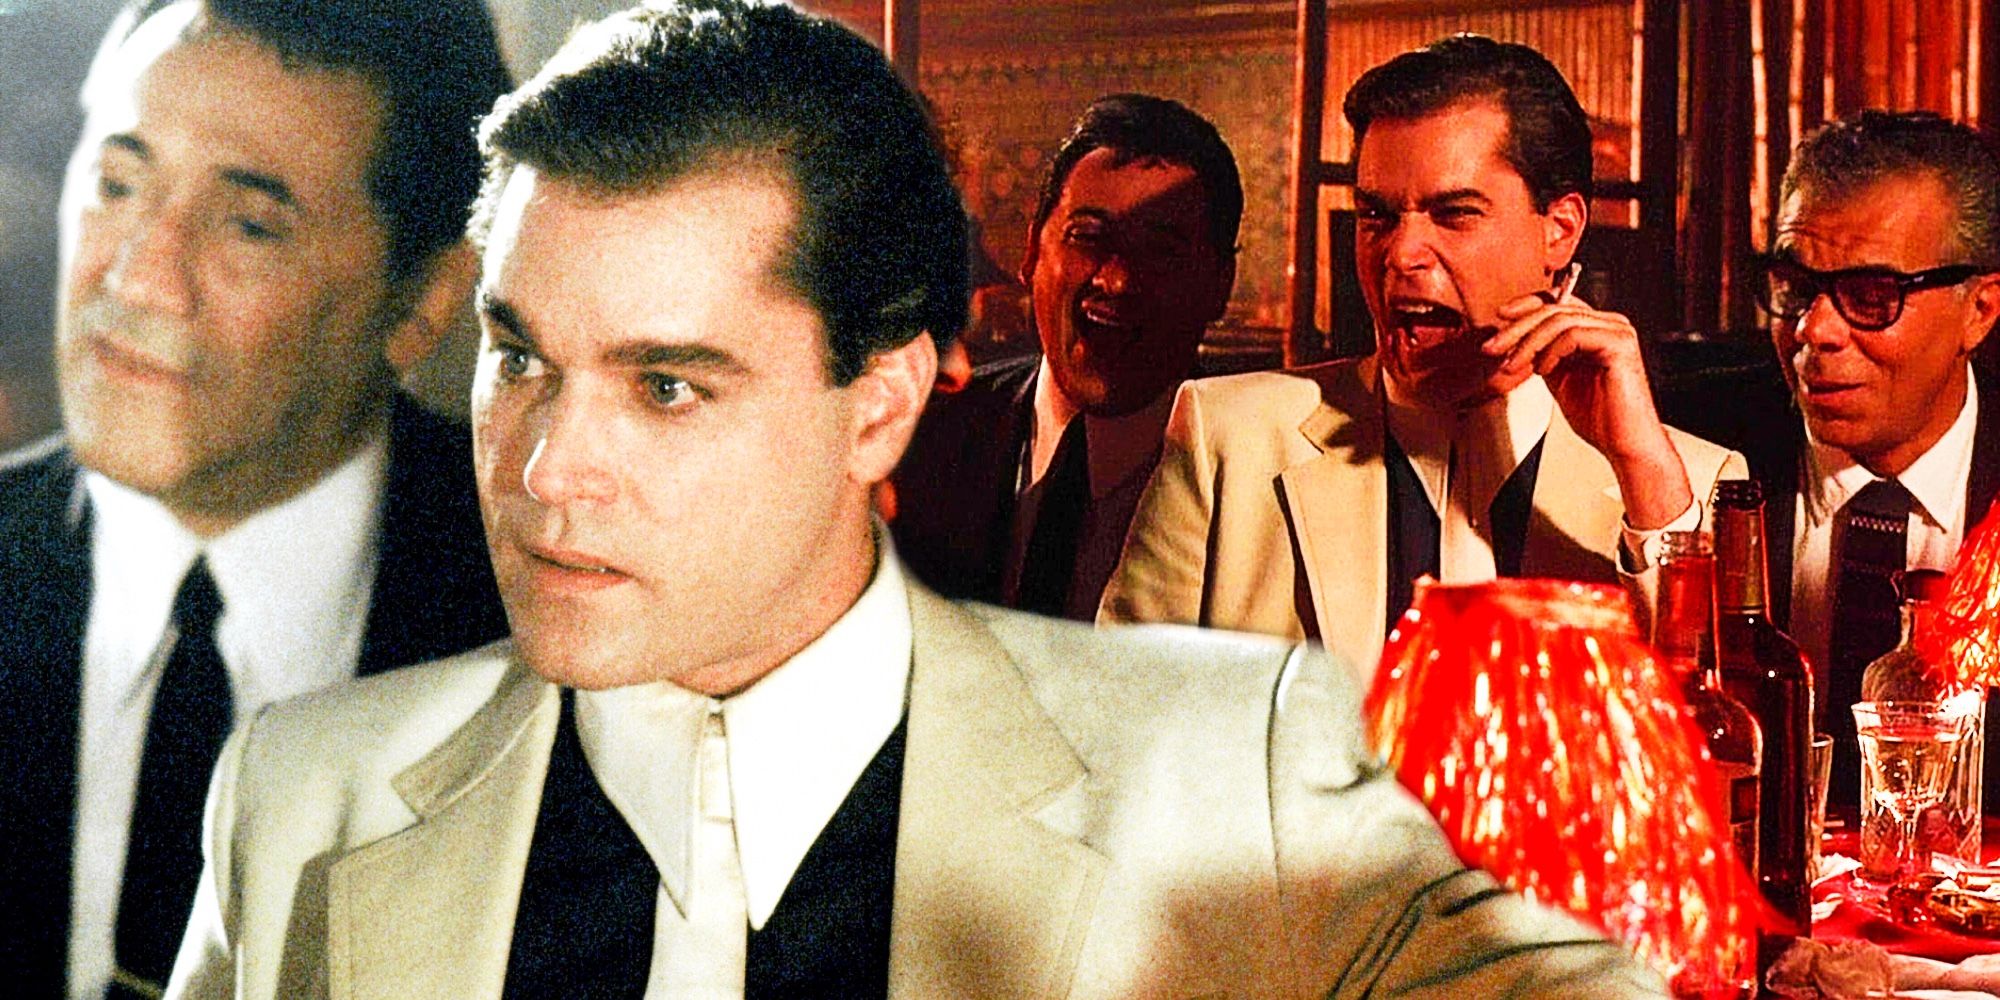 genius goodfellas cold open is even better than you realize ray liotta